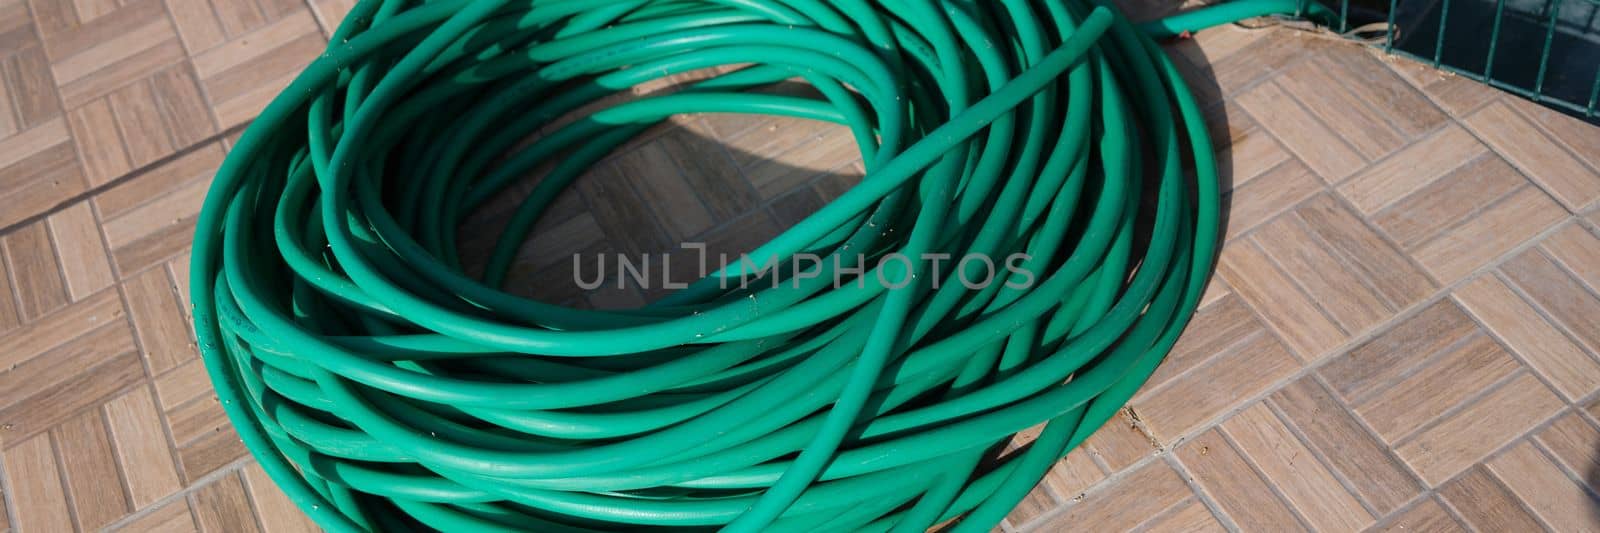 Green twisted garden hose in garden. Watering system and choosing a quality garden hose